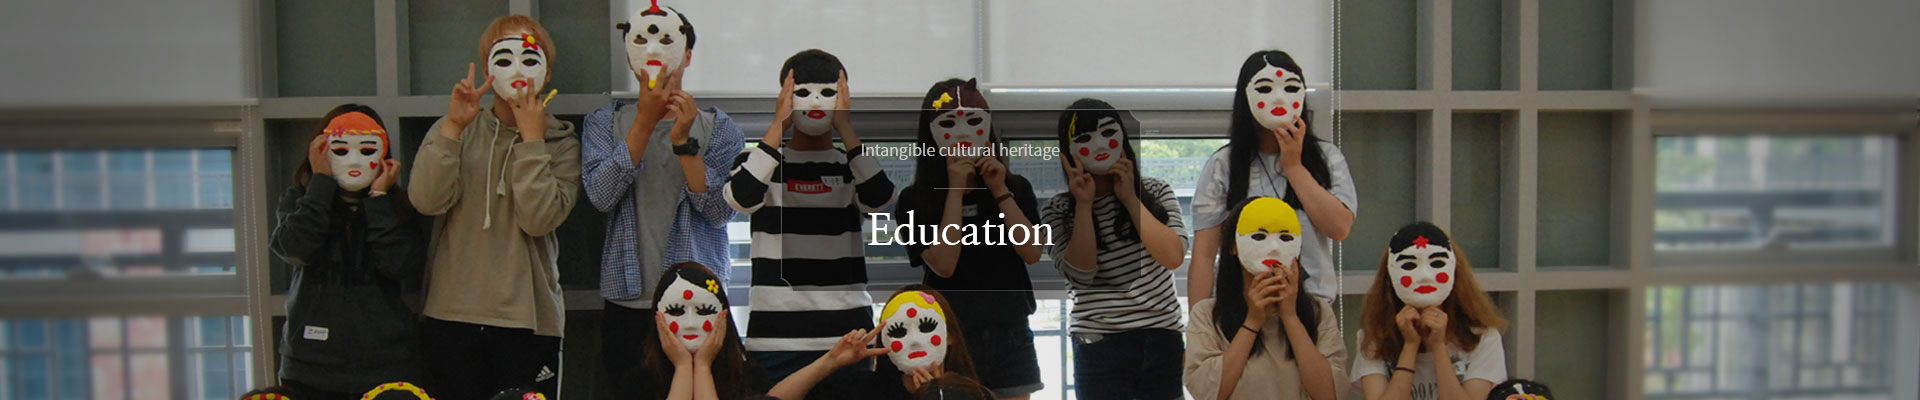 Intangible cultural heritage, Education